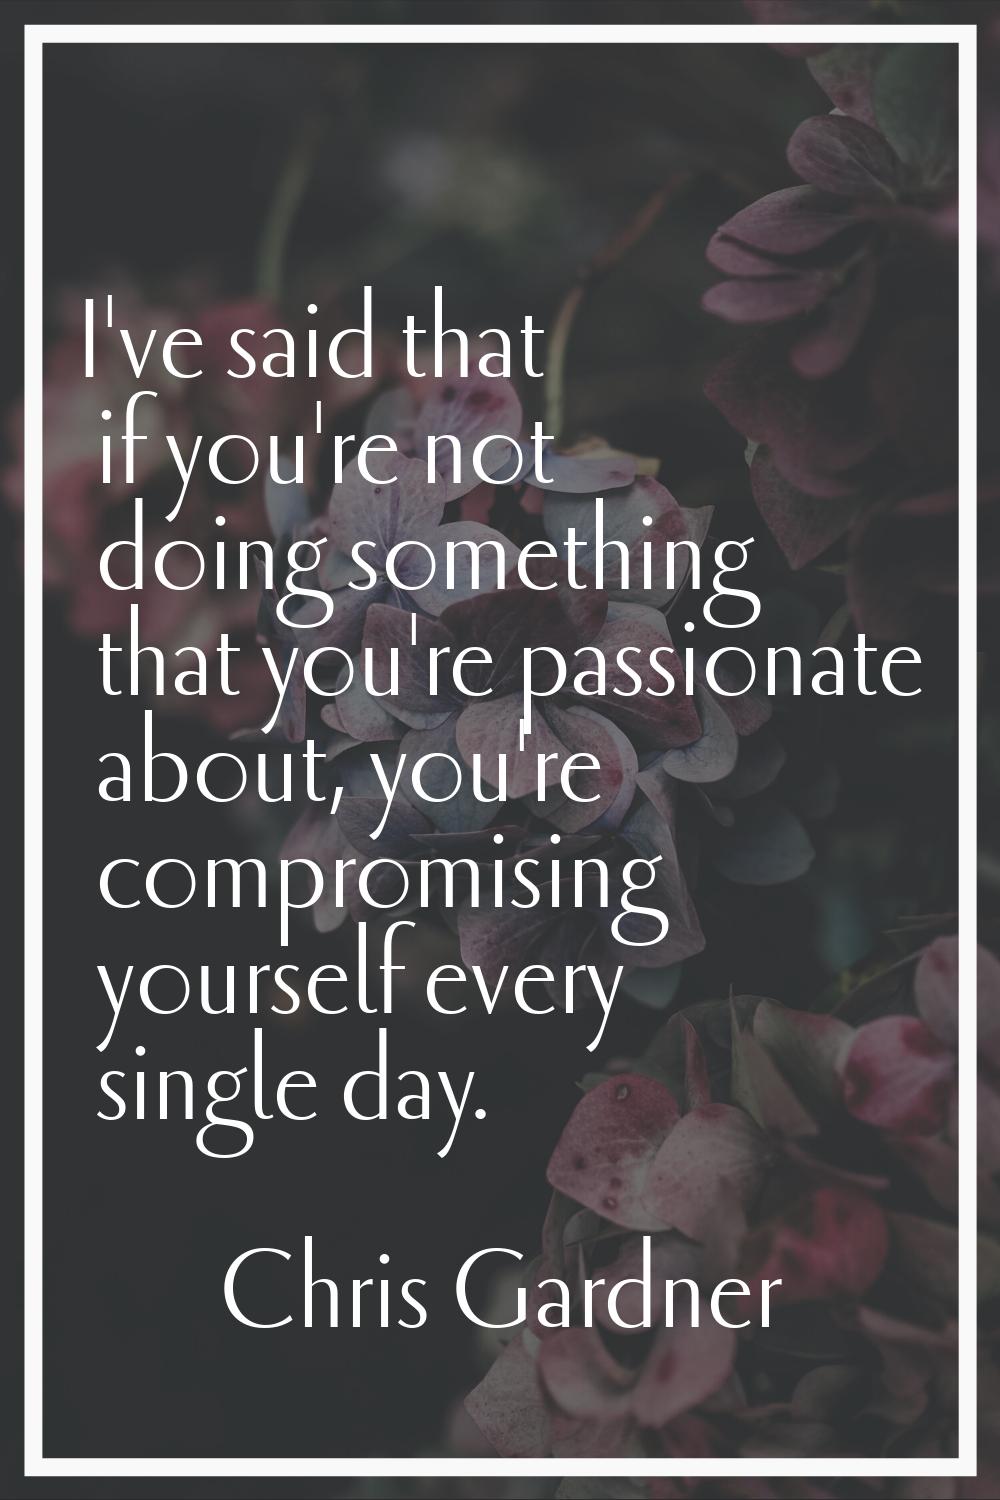 I've said that if you're not doing something that you're passionate about, you're compromising your